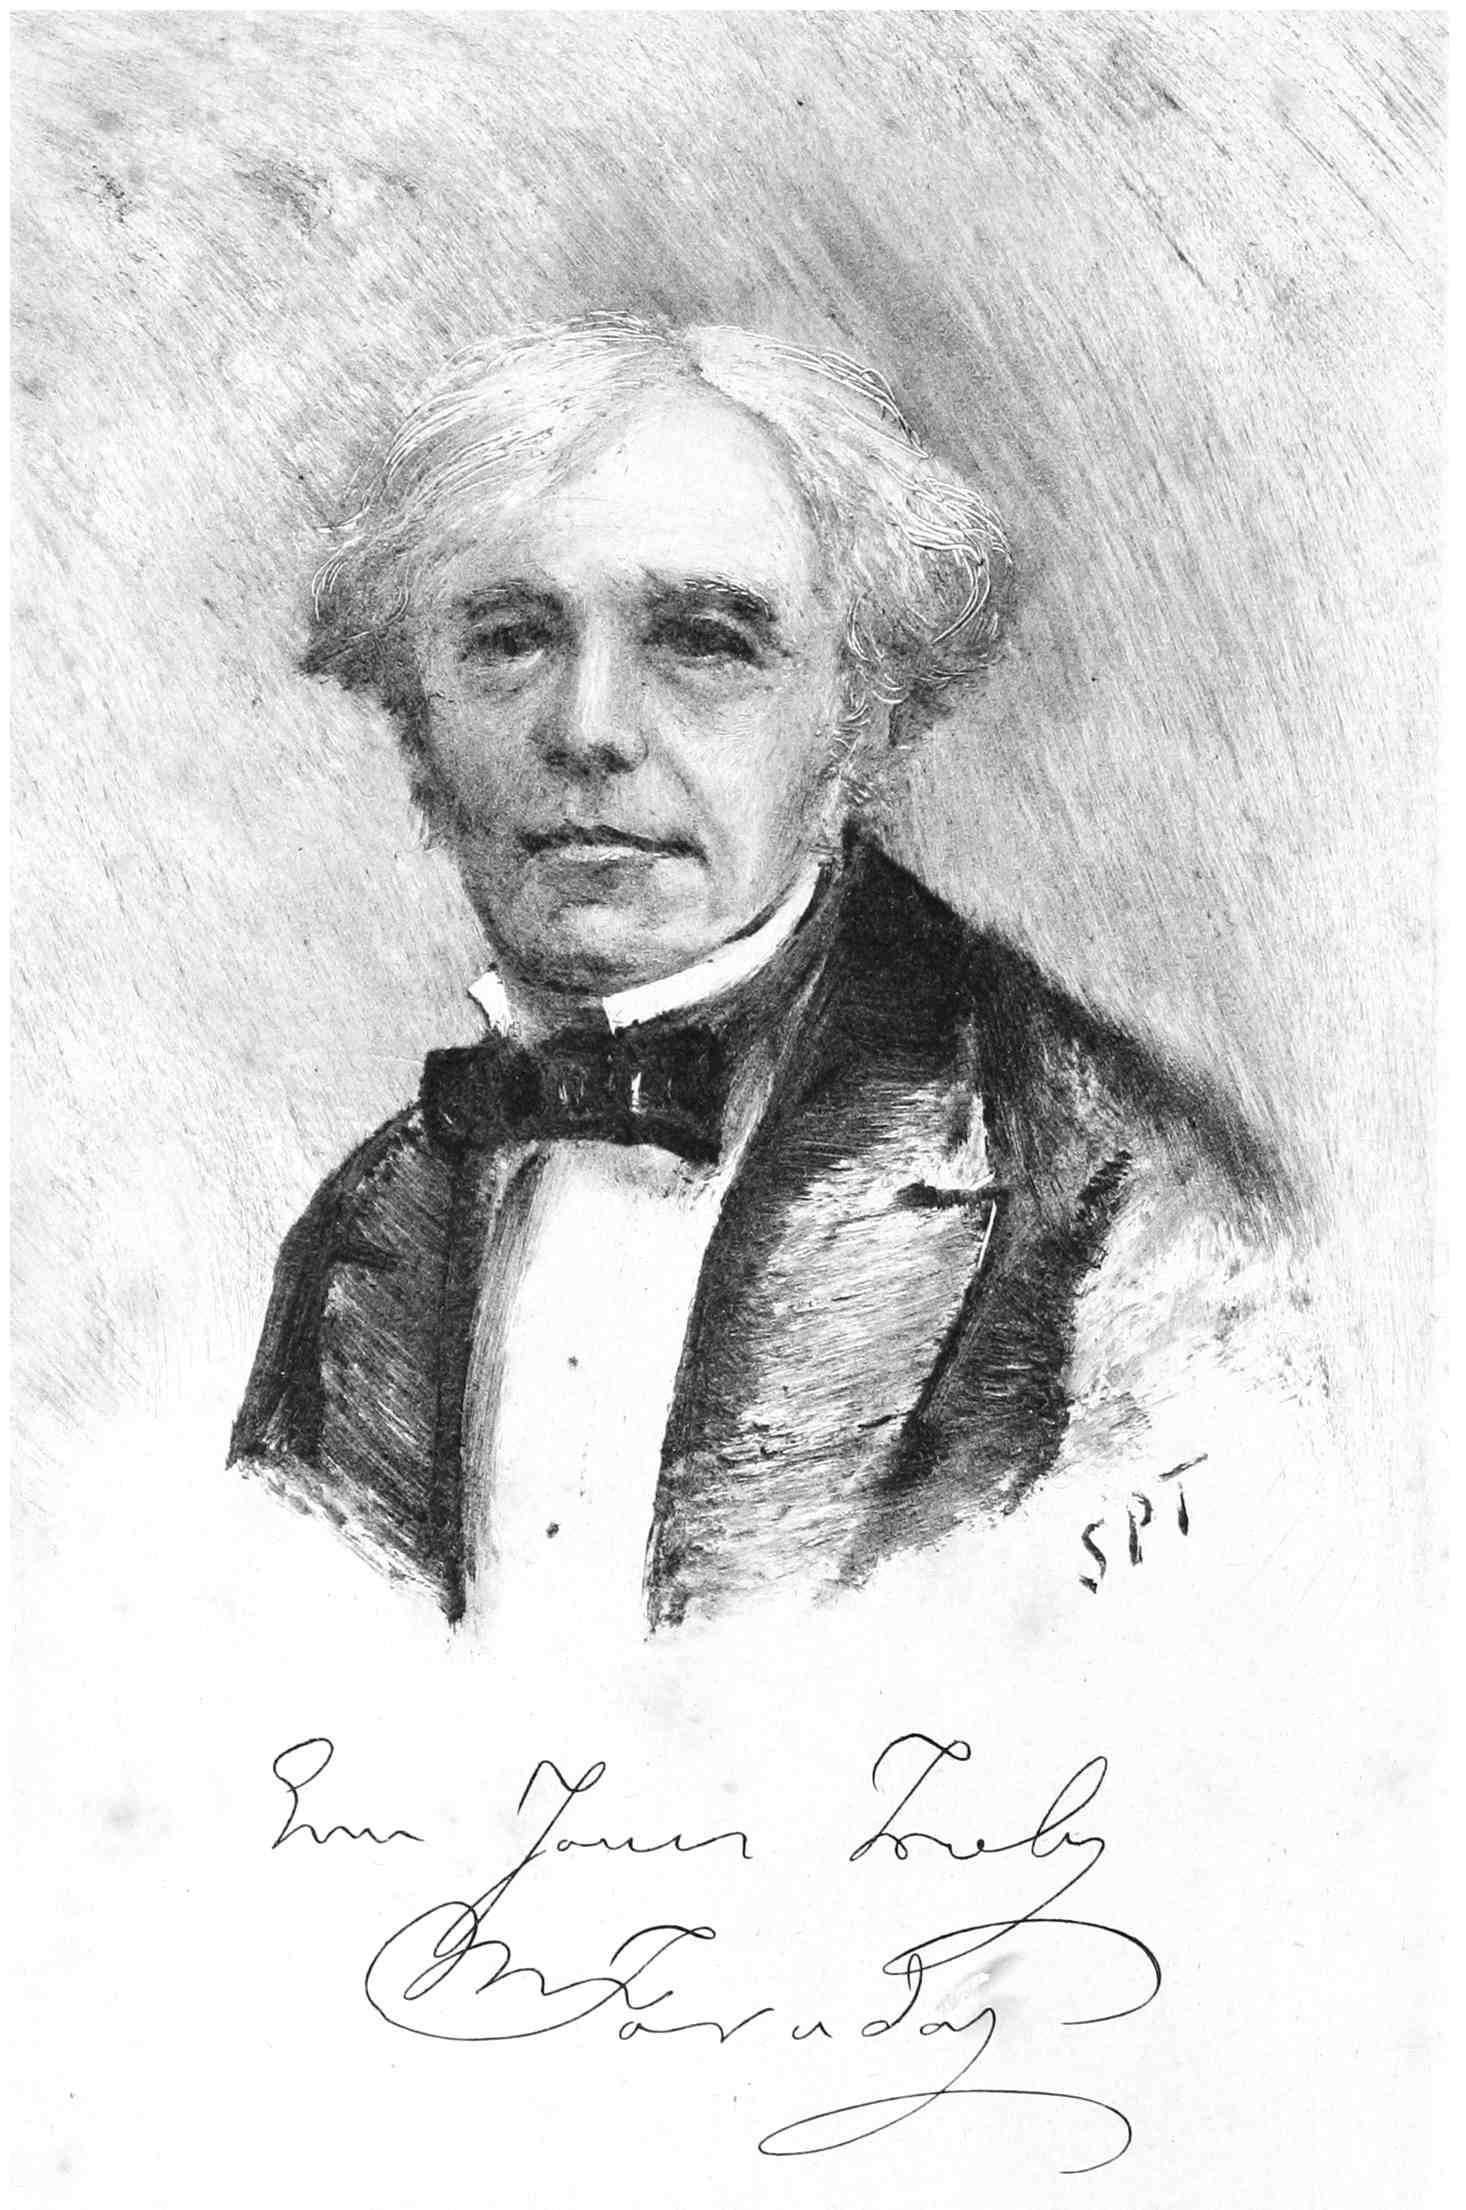 Archives Biographies: Michael Faraday